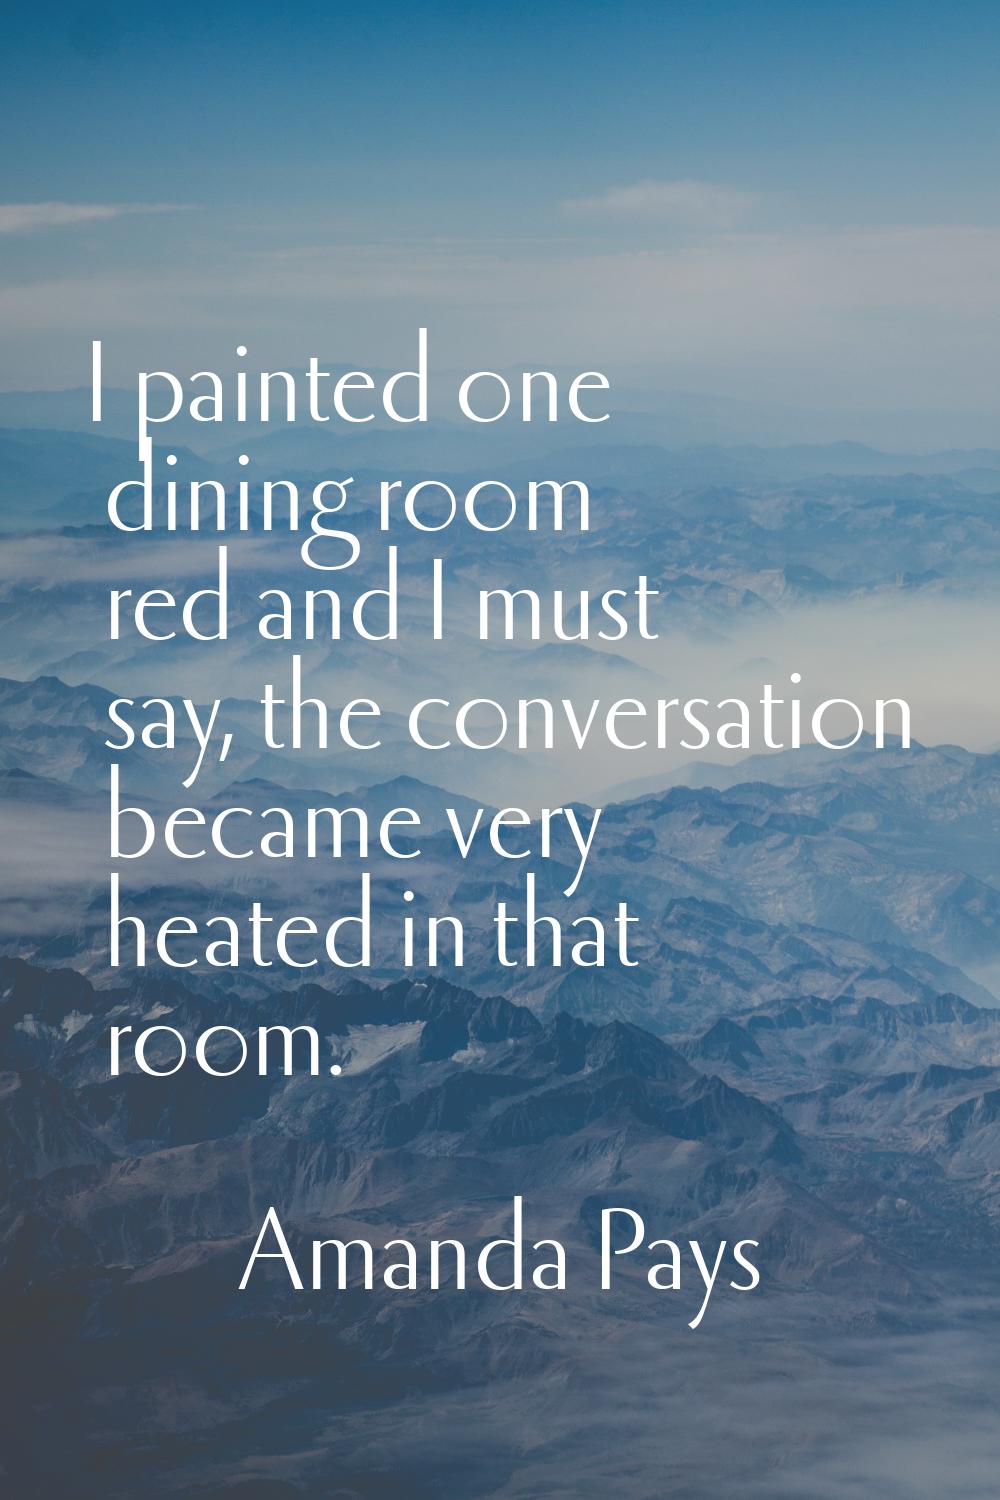 I painted one dining room red and I must say, the conversation became very heated in that room.